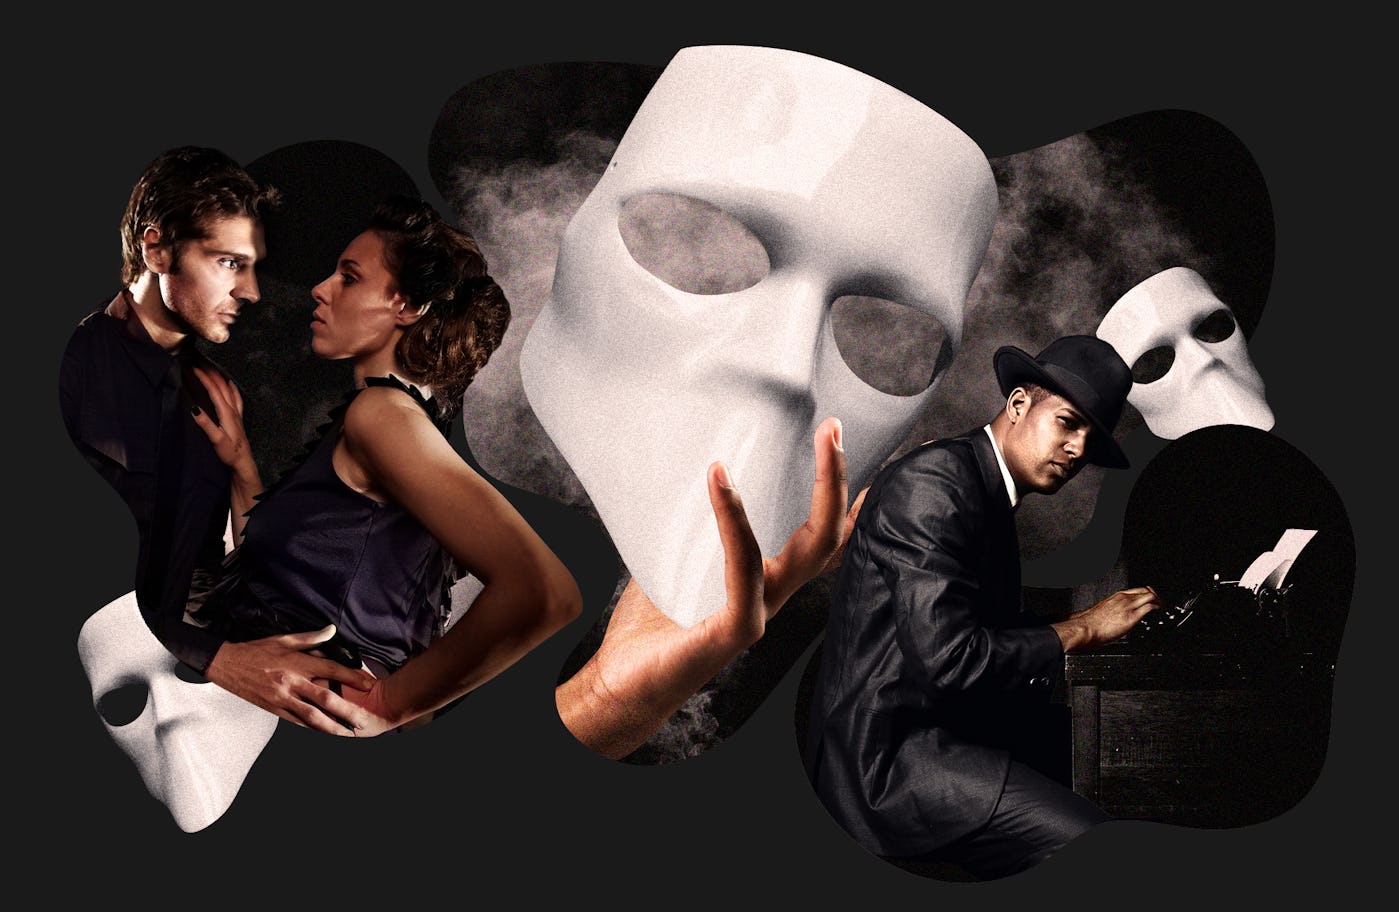 Artistic collage of a couple embracing, a man in a hat holding a briefcase, and a large floating mask surrounded by smoke.